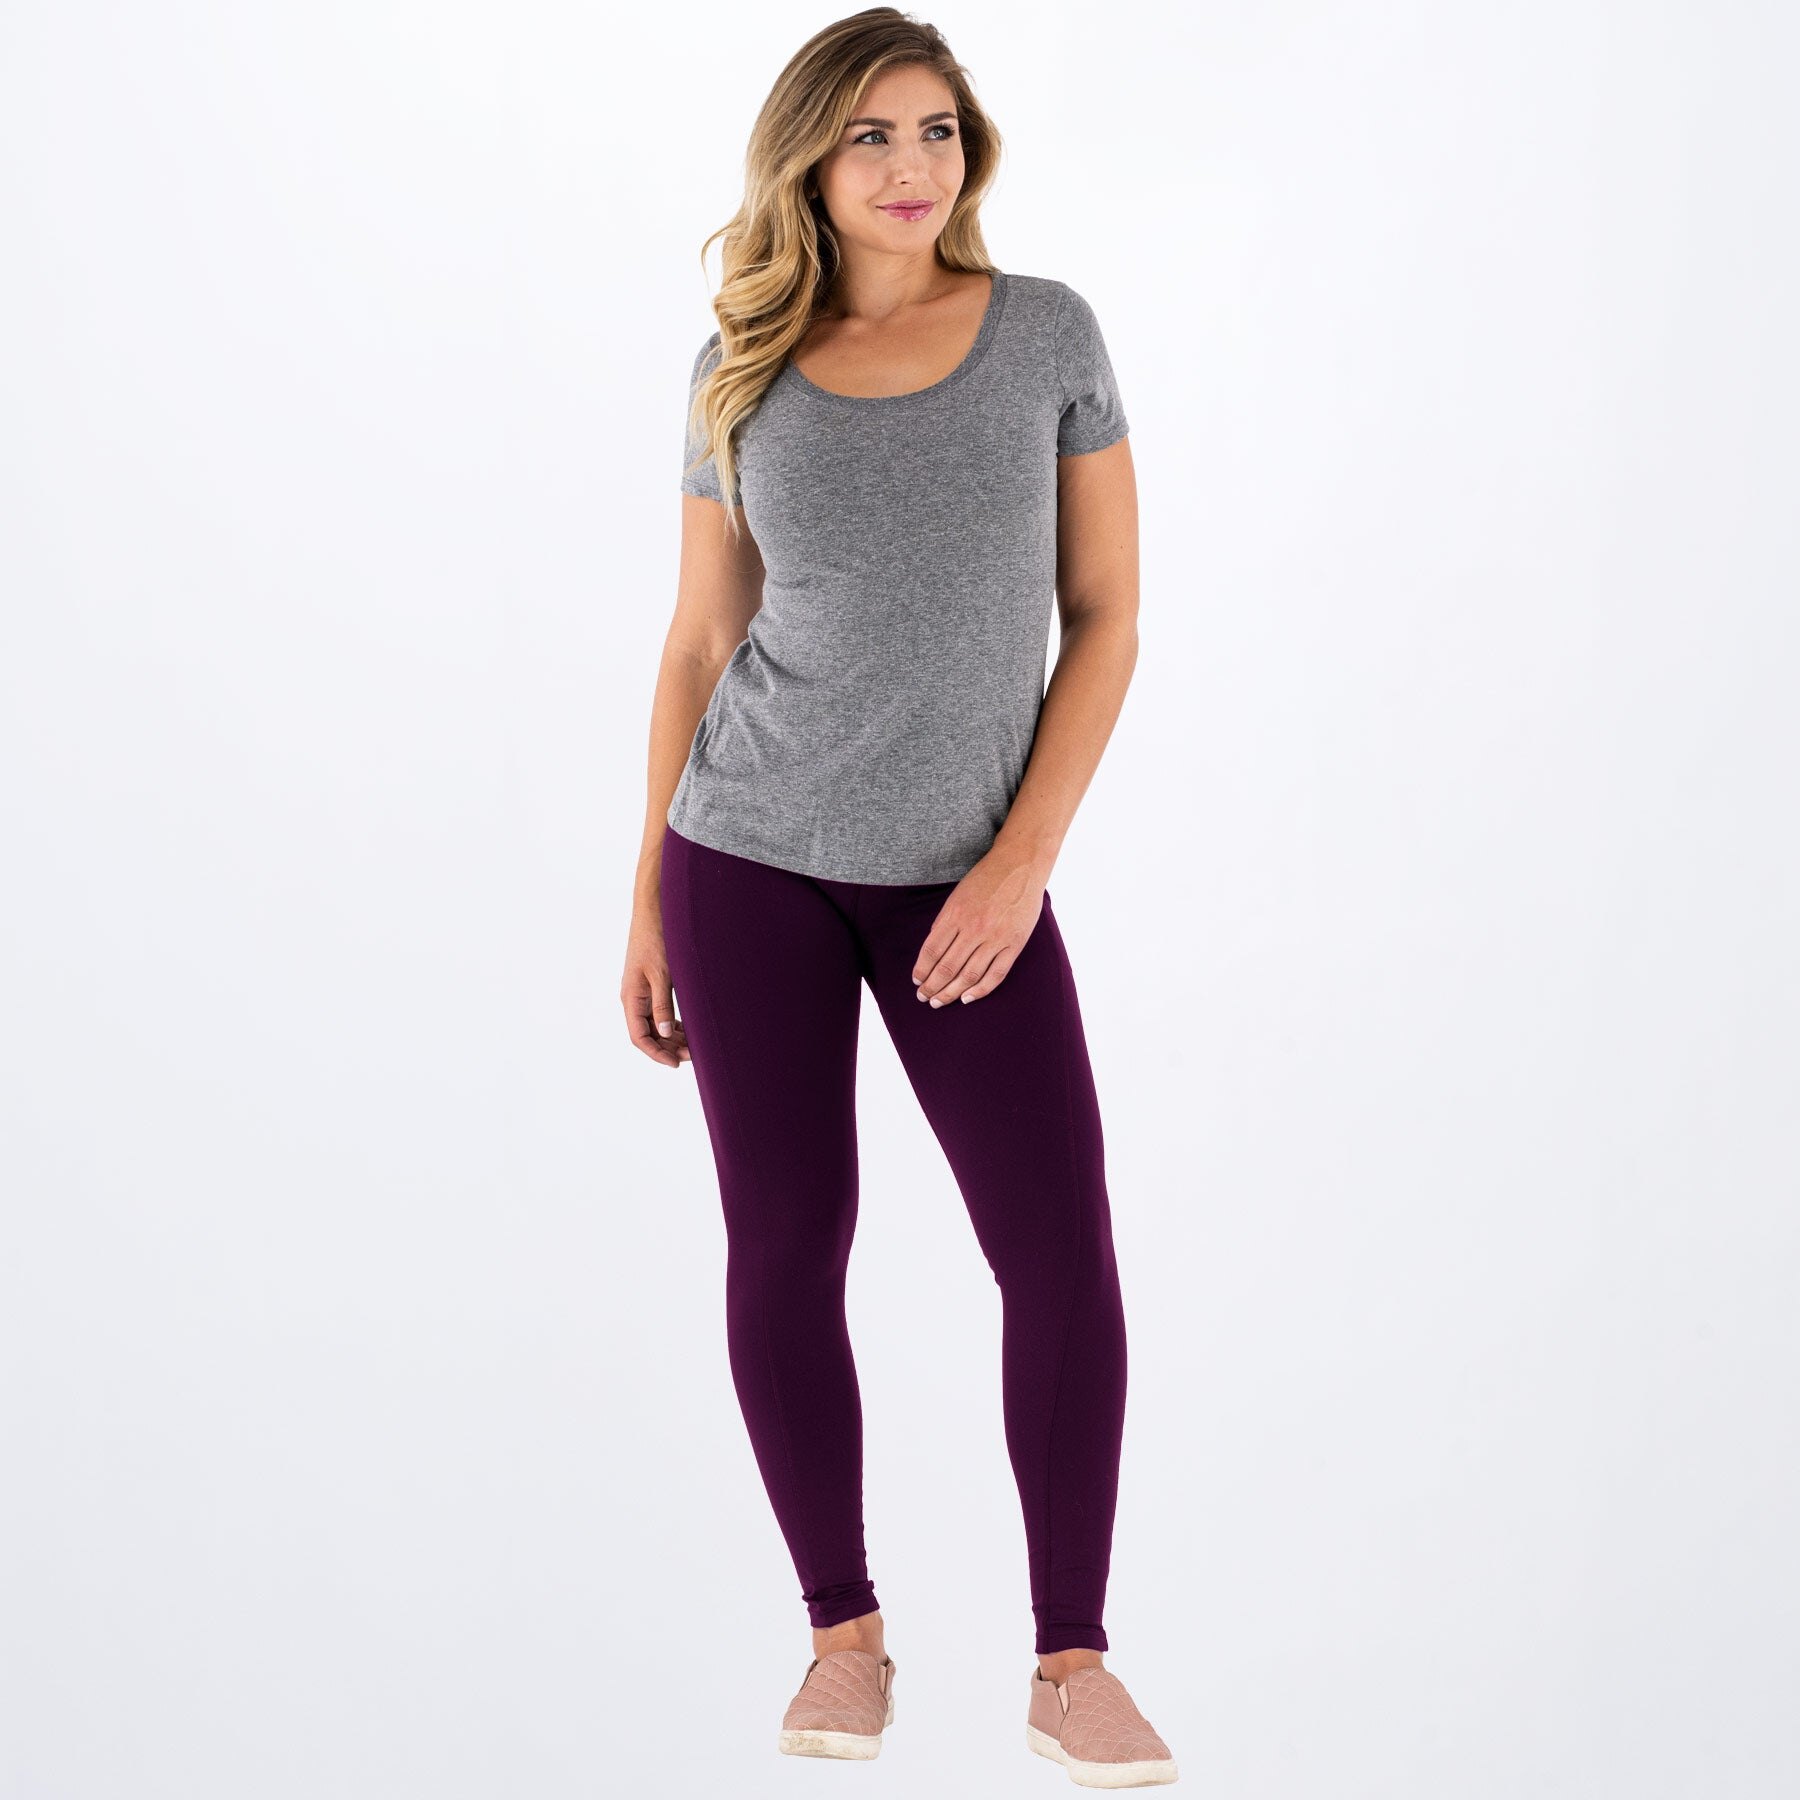 Women's Track Active Legging 2XL Charcoal Heather